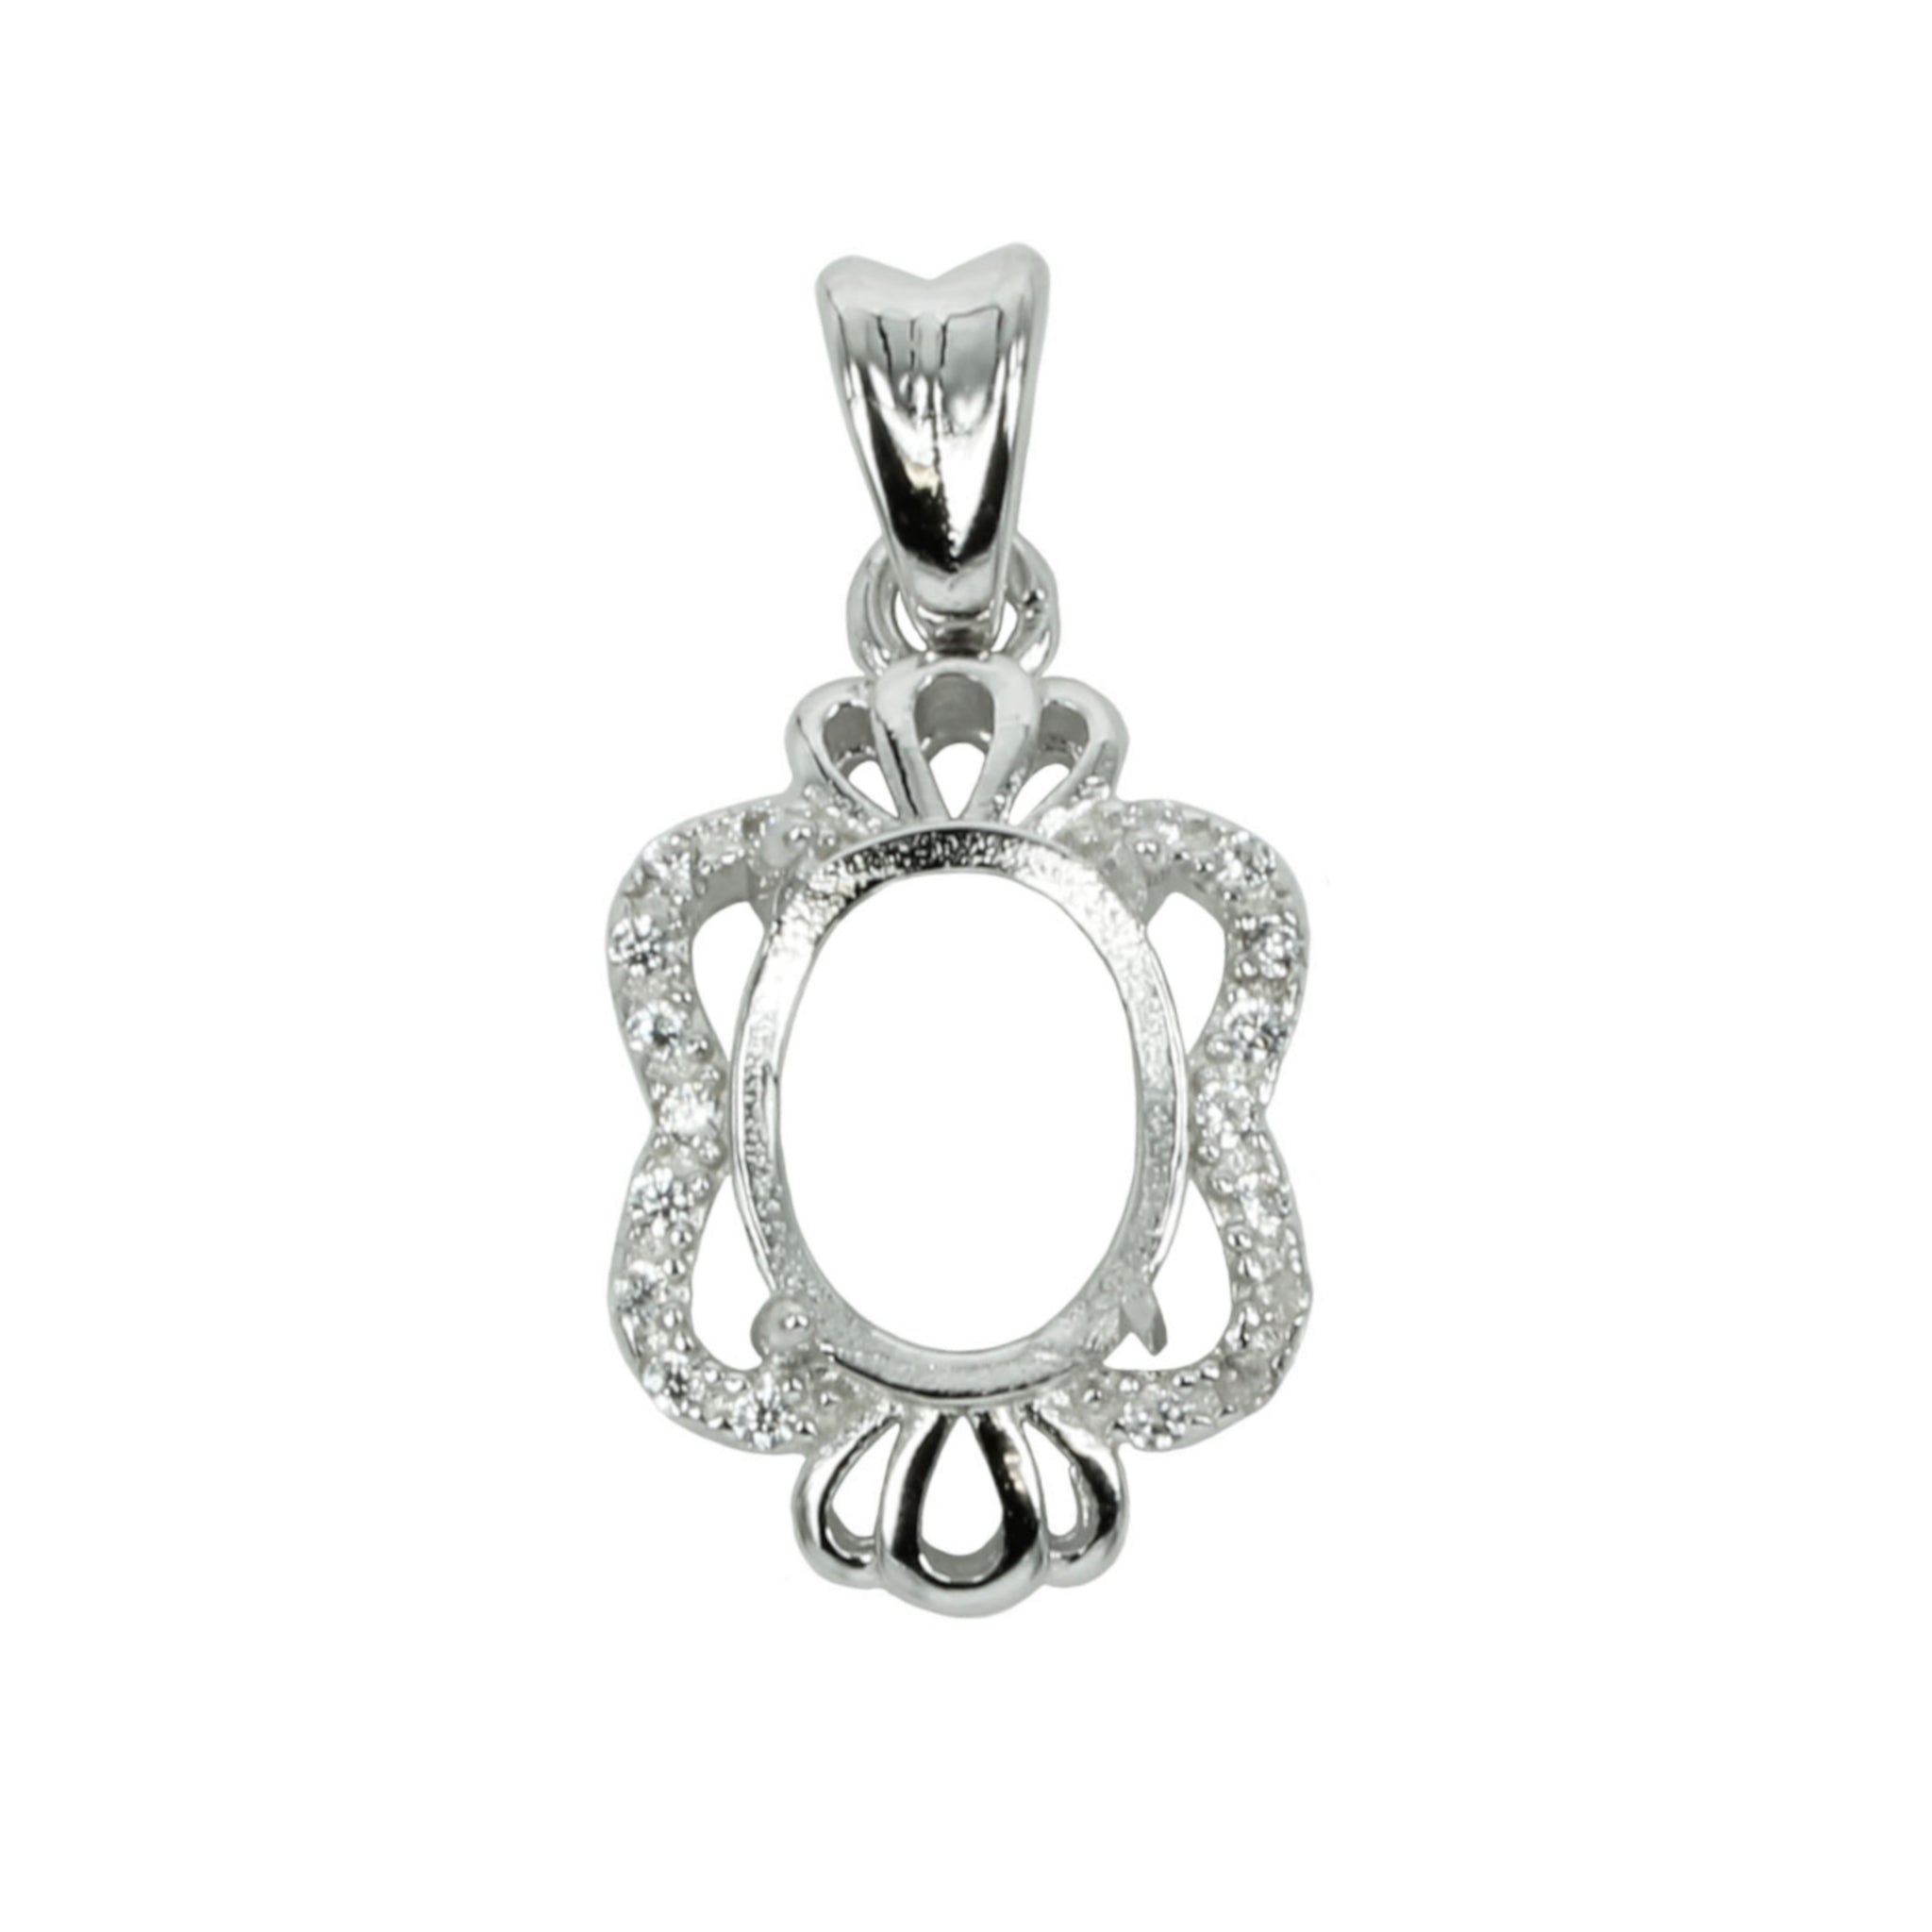 Crowned Pendant with CZ's in Sterling Silver for 7x9mm Stones